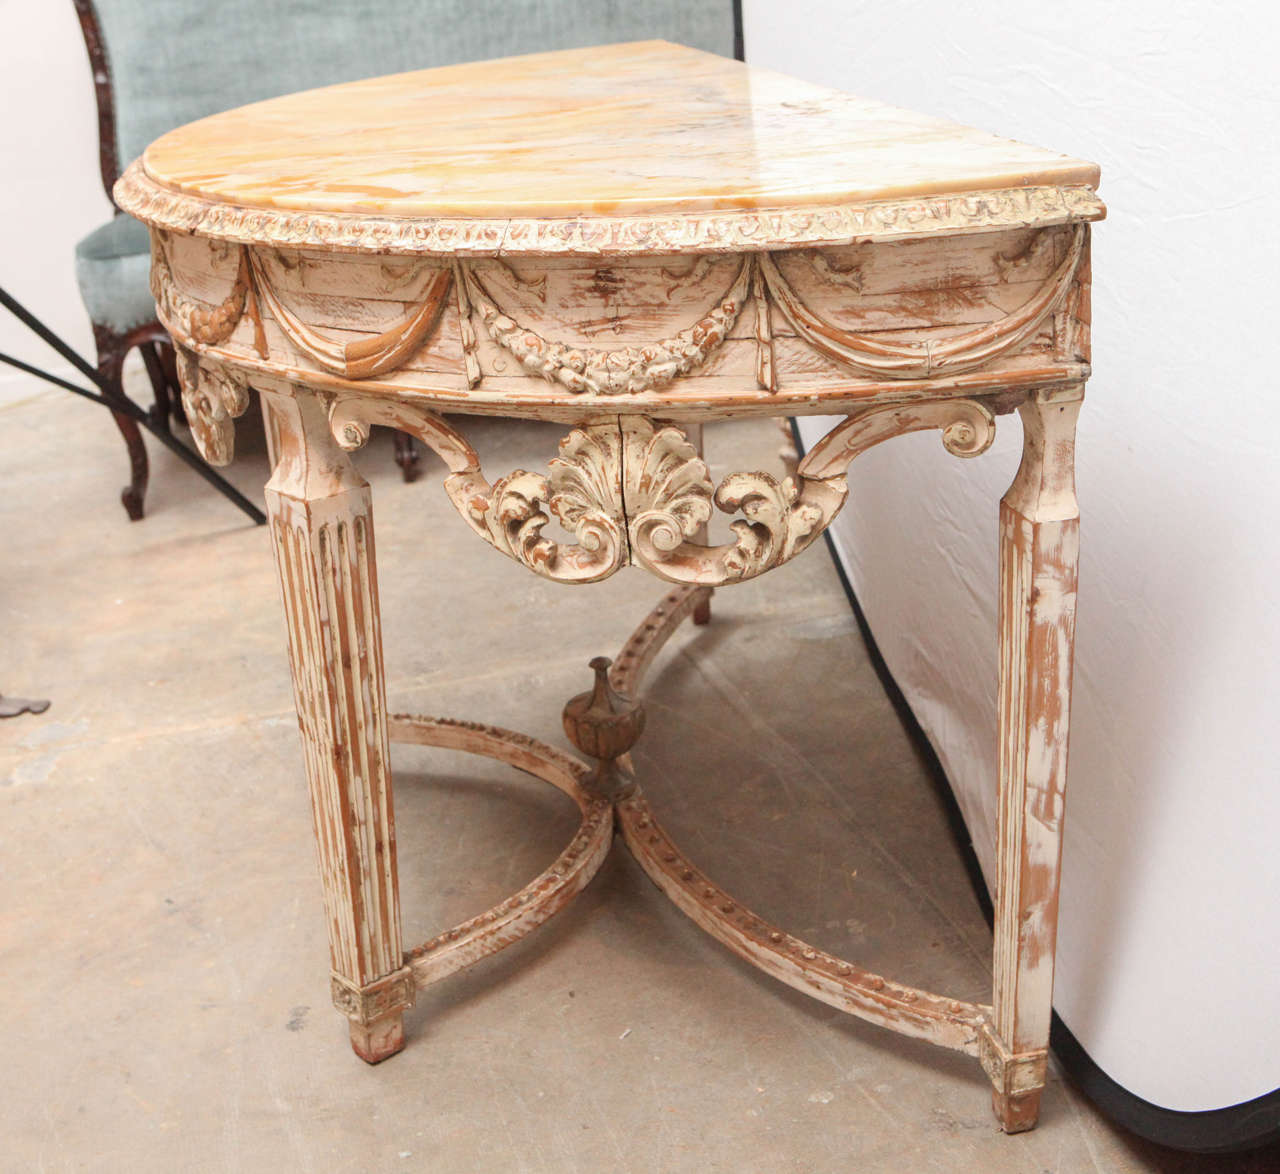 19th Century Italian Carved Demilune Console Table with Stretcher For Sale 5